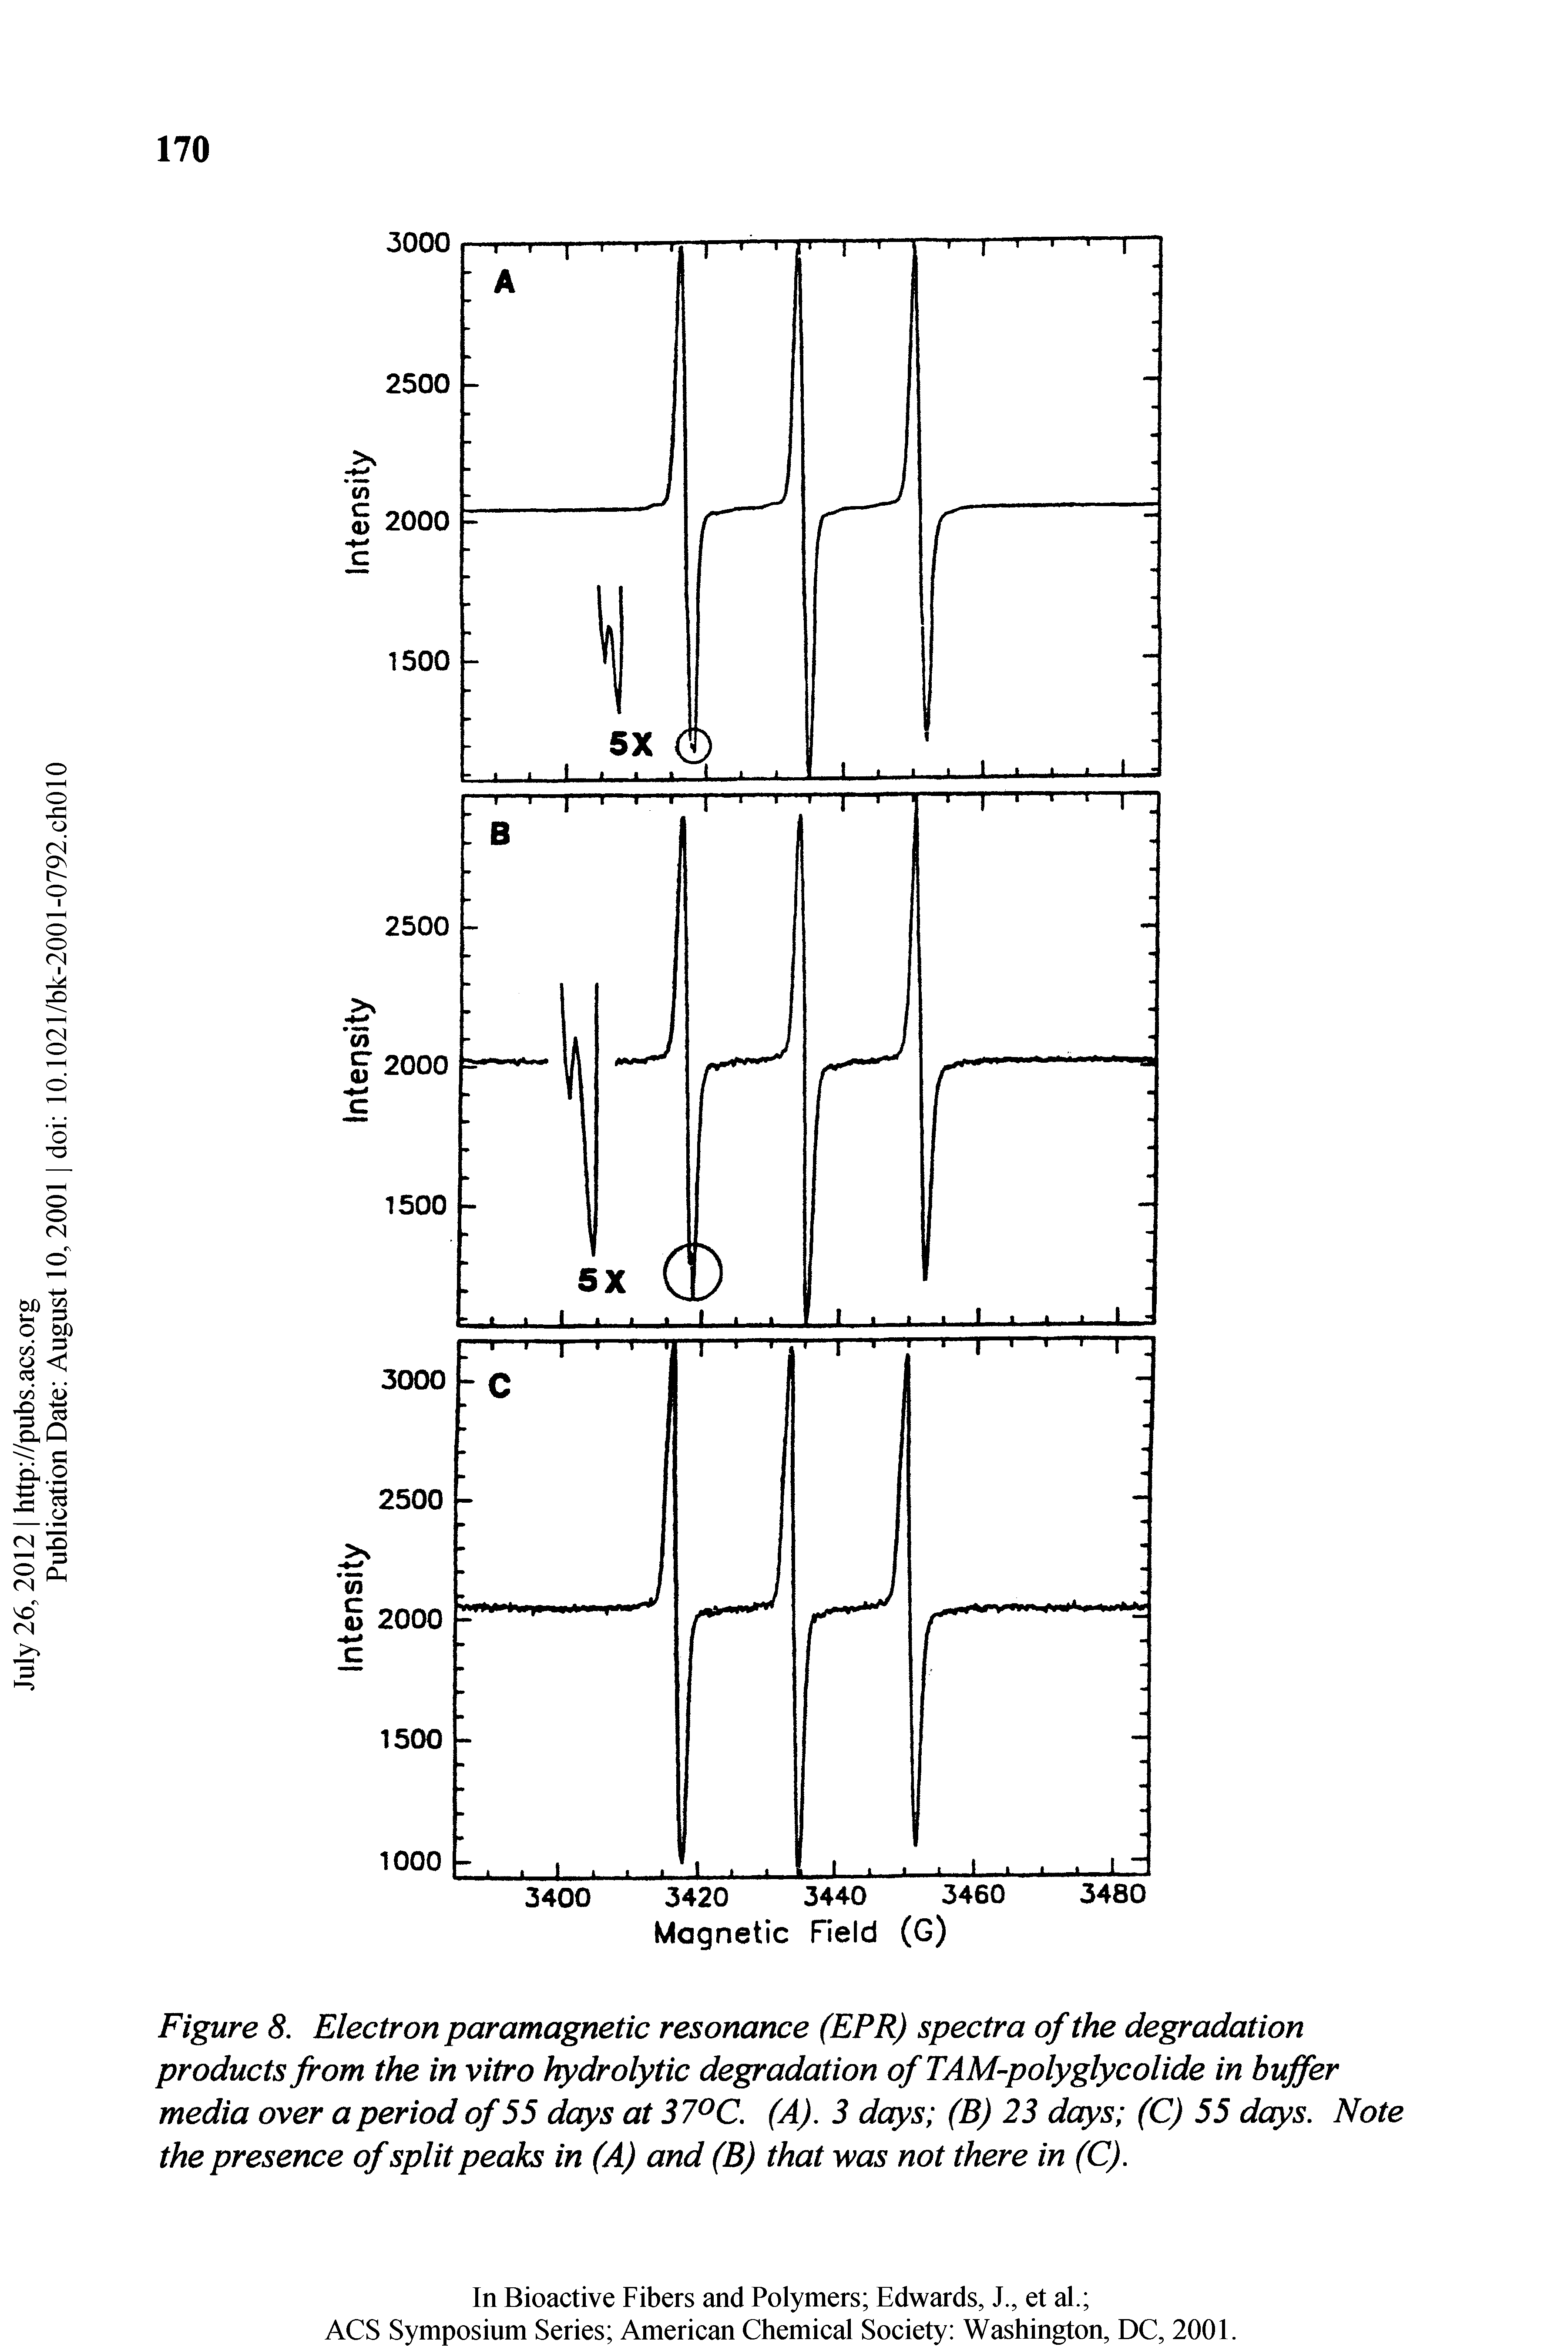 Figure 8. Electron paramagnetic resonance (EPR) spectra of the degradation products from the in vitro hydrolytic degradation of TAM-polyglycolide in buffer media over a period of 55 days at 37 C. (A). 3 days (B) 23 days (C) 55 days. Note the presence of split peaks in (A) and (B) that was not there in (C).